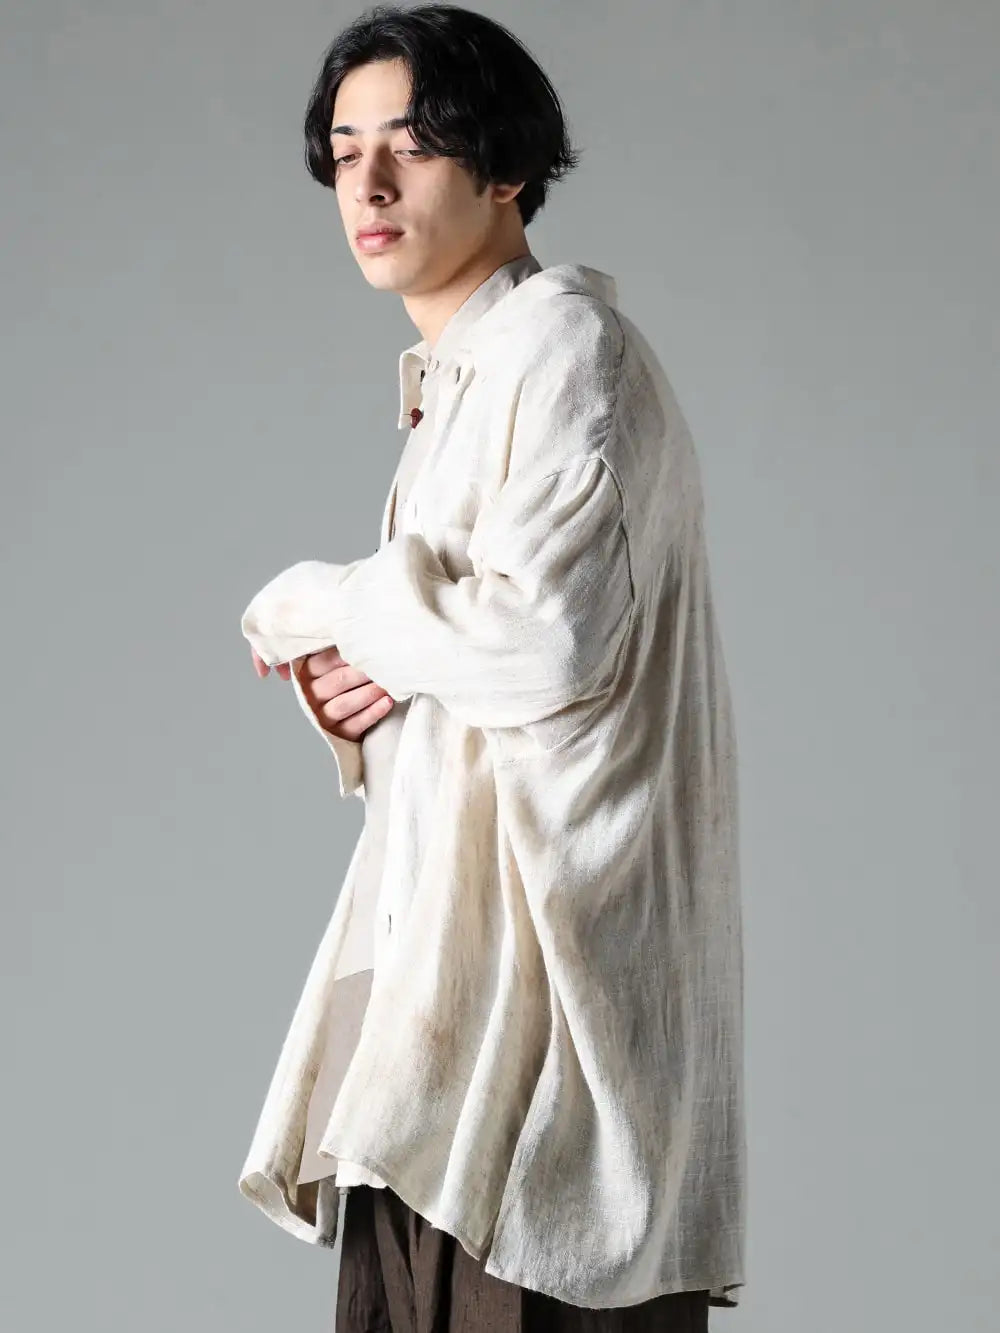 Peng Tai DEVOA 24SS  - Oversized shirts tailored with a neutral atmosphere - PTS24M06-2 Hand Dye Double Pocket Oversized Shirt SHE-CTKM Shirt Cotton 2-002